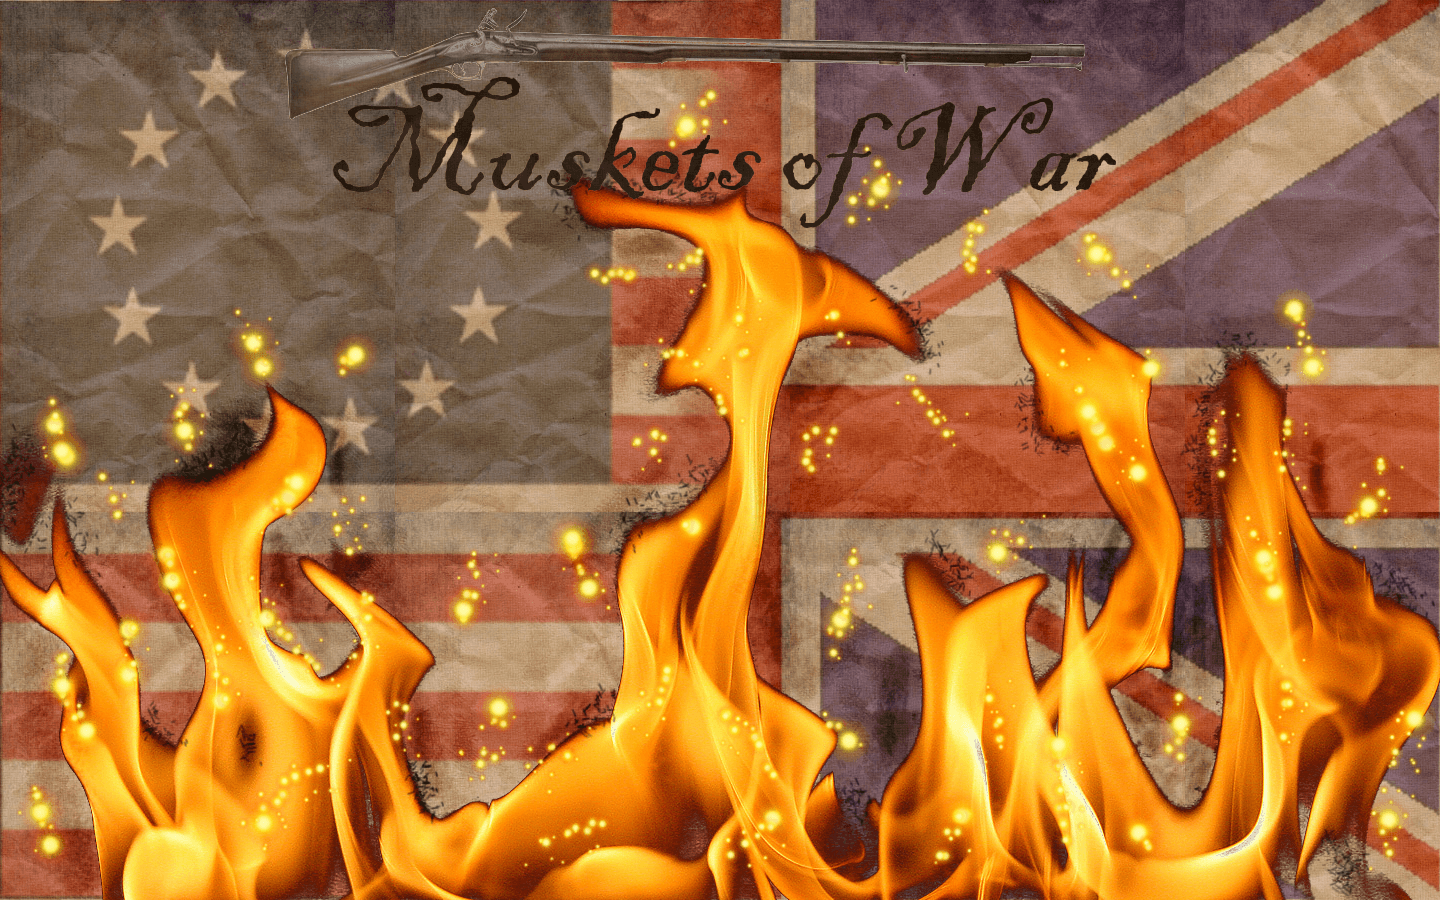 New BackGround for mow image Of War an American Revolution